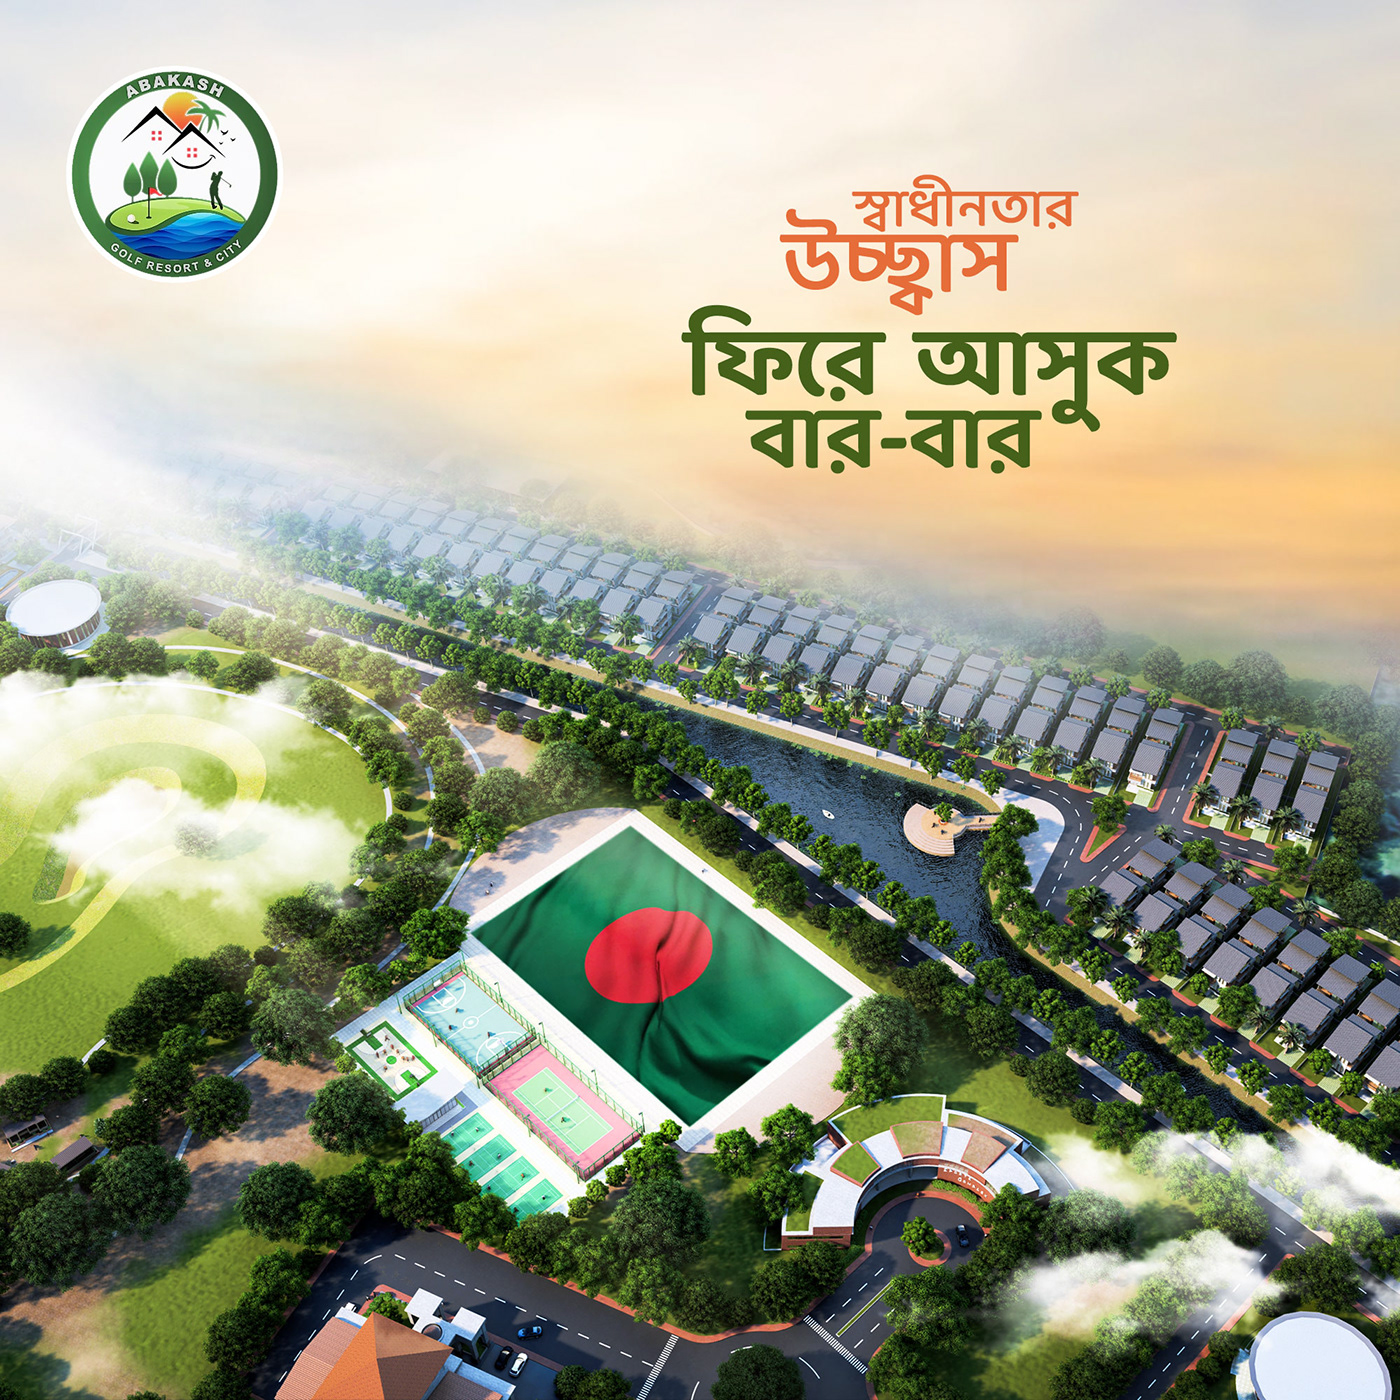 independence day 26thMarch Bangladesh 26th march Poster independencedaybd